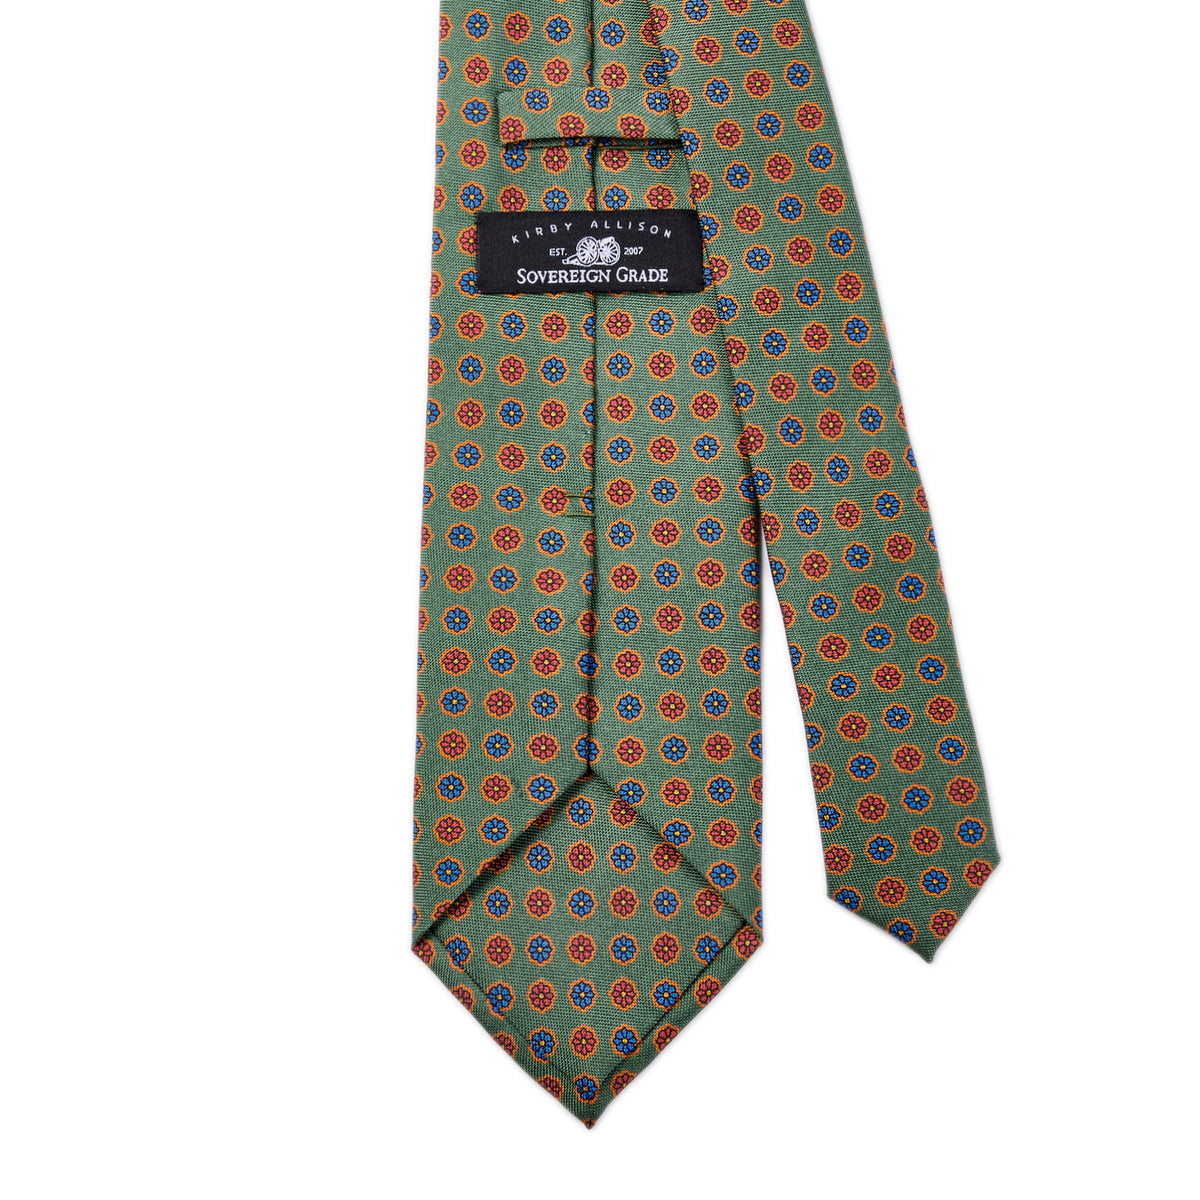 A Sovereign Grade Leaf Floral 25 oz Hopsack Silk tie by KirbyAllison.com, crafted with the highest quality craftsmanship in the United Kingdom.